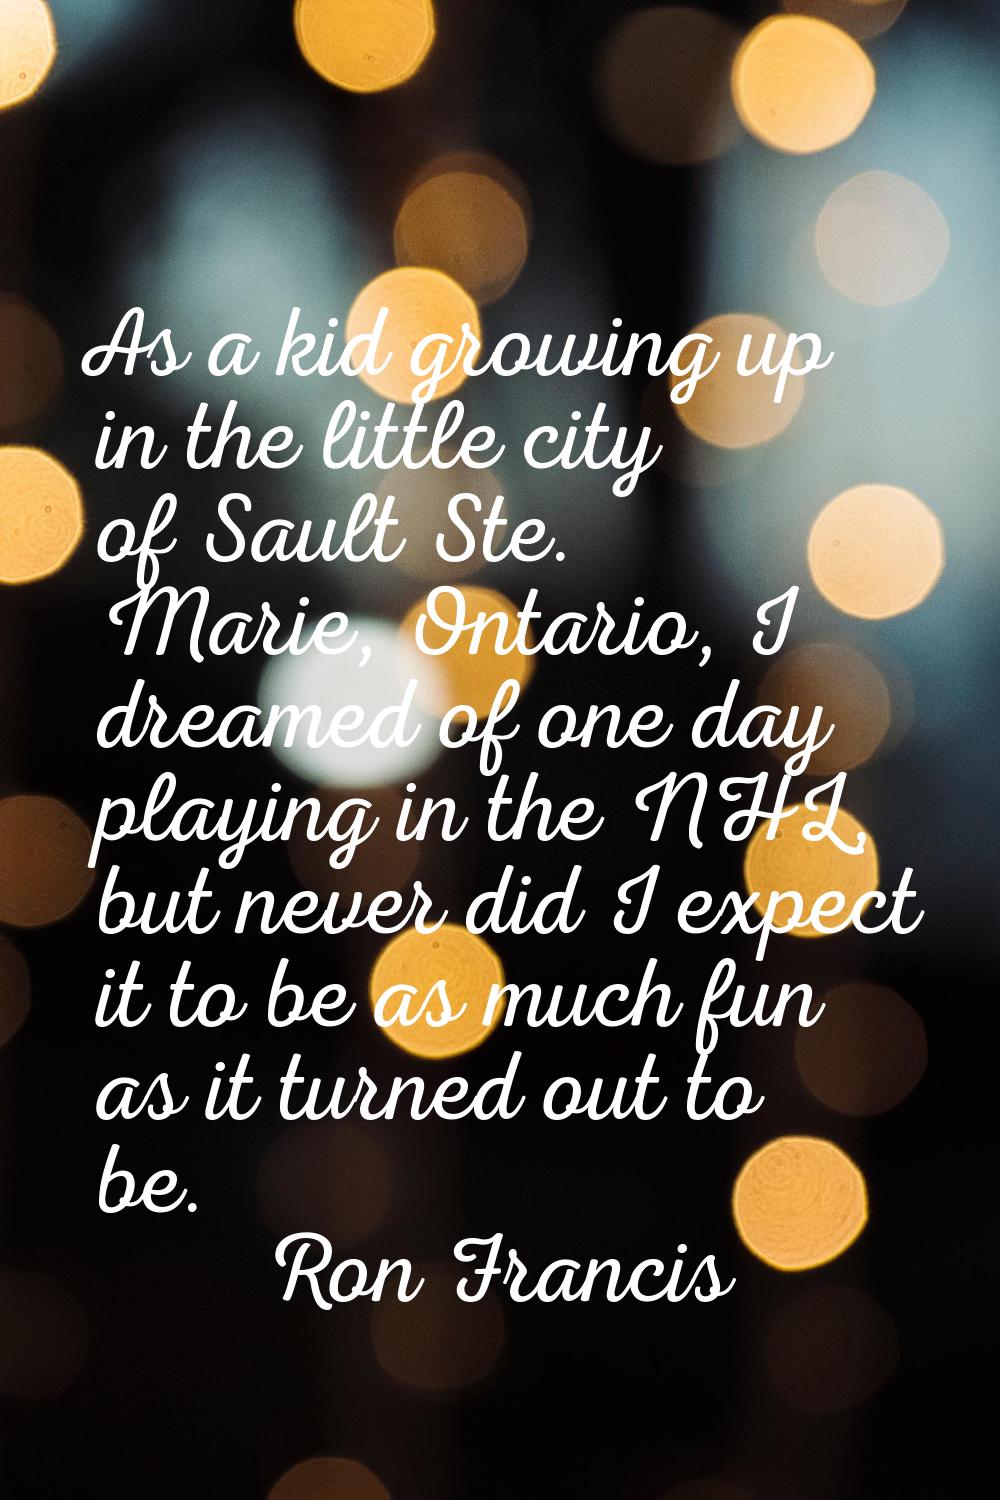 As a kid growing up in the little city of Sault Ste. Marie, Ontario, I dreamed of one day playing i